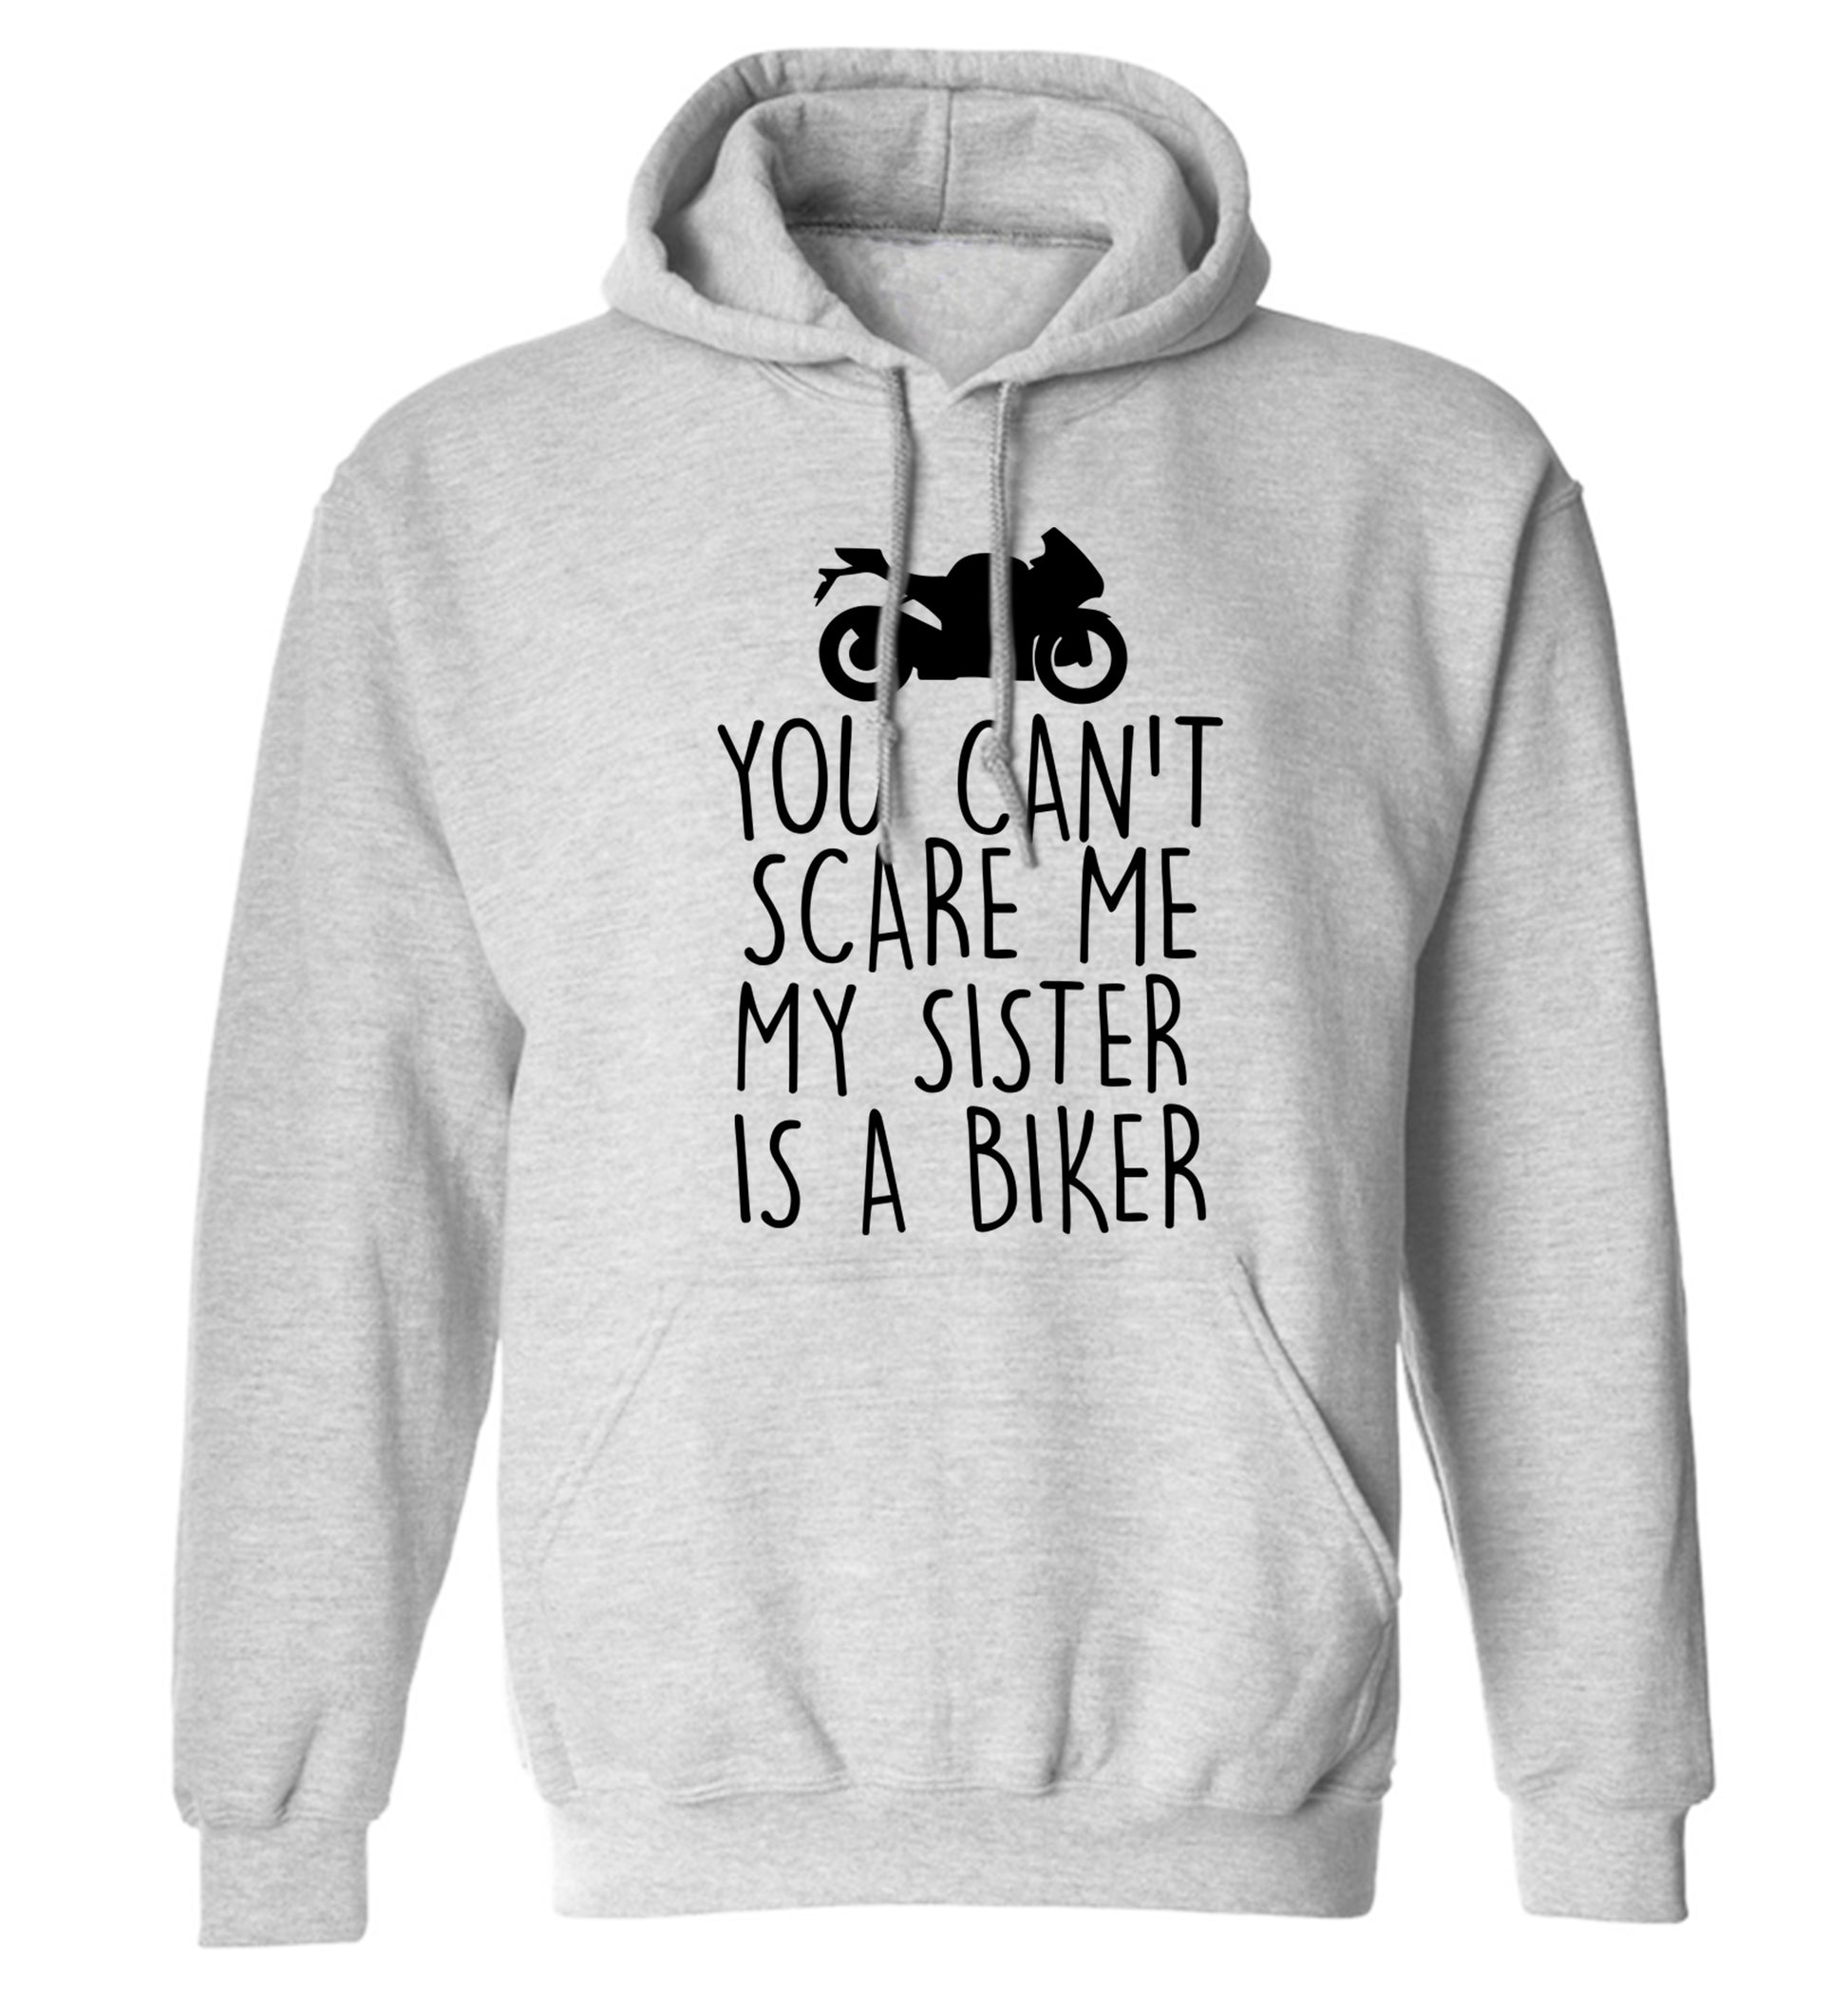 You can't scare me my sister is a biker adults unisex grey hoodie 2XL